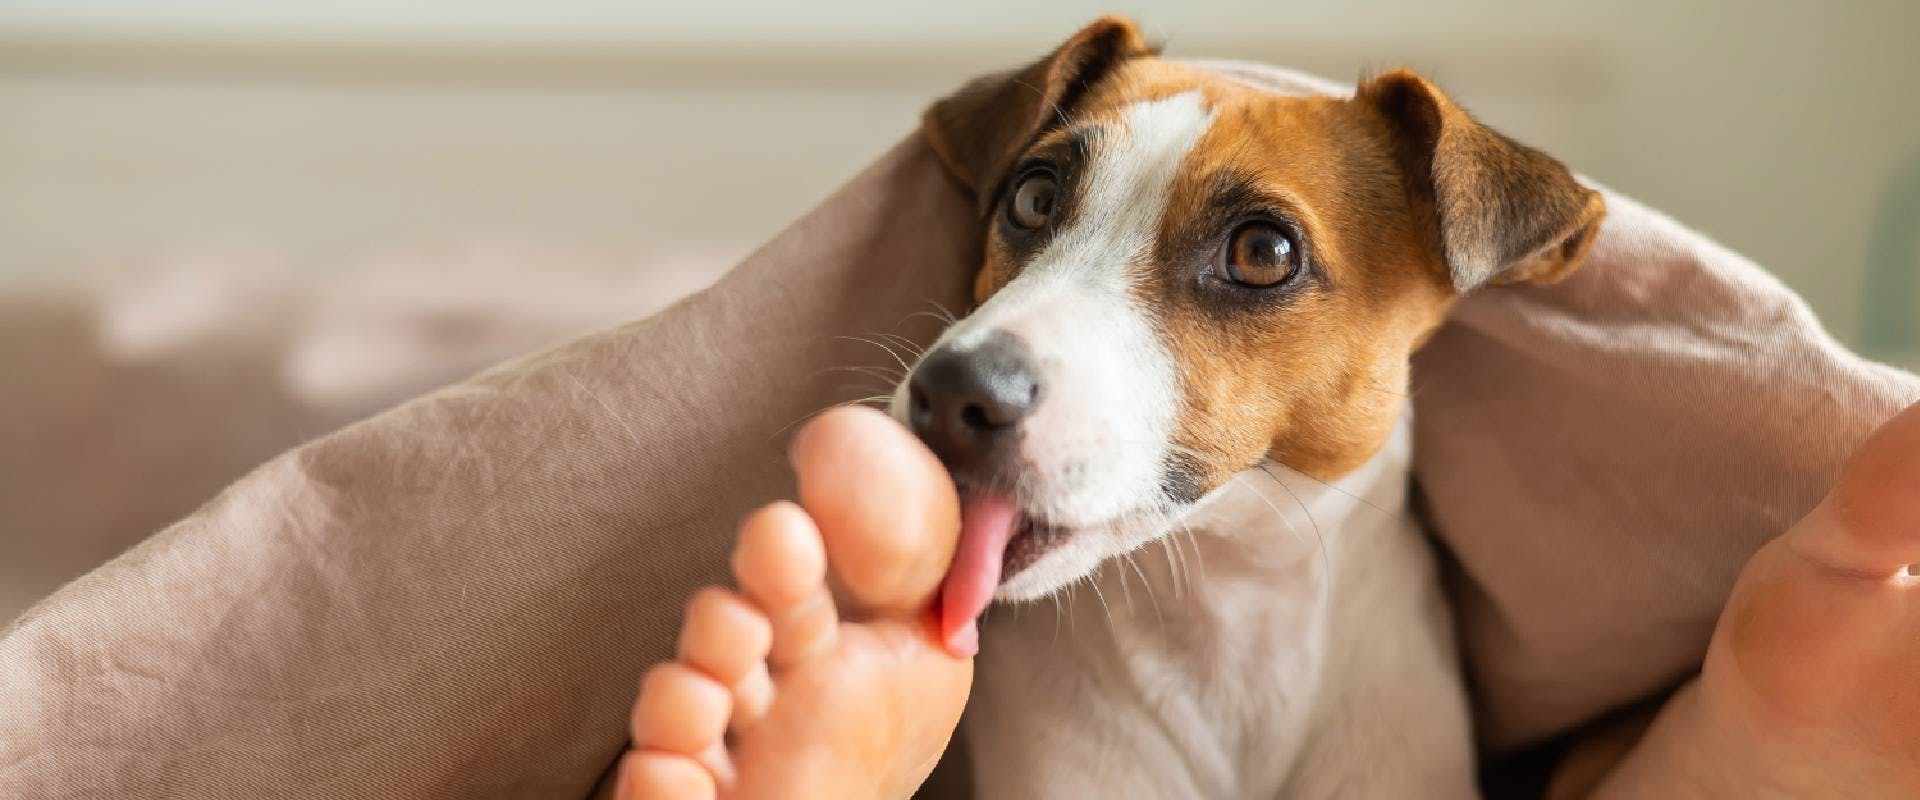 Jack Russell licking someone's foot